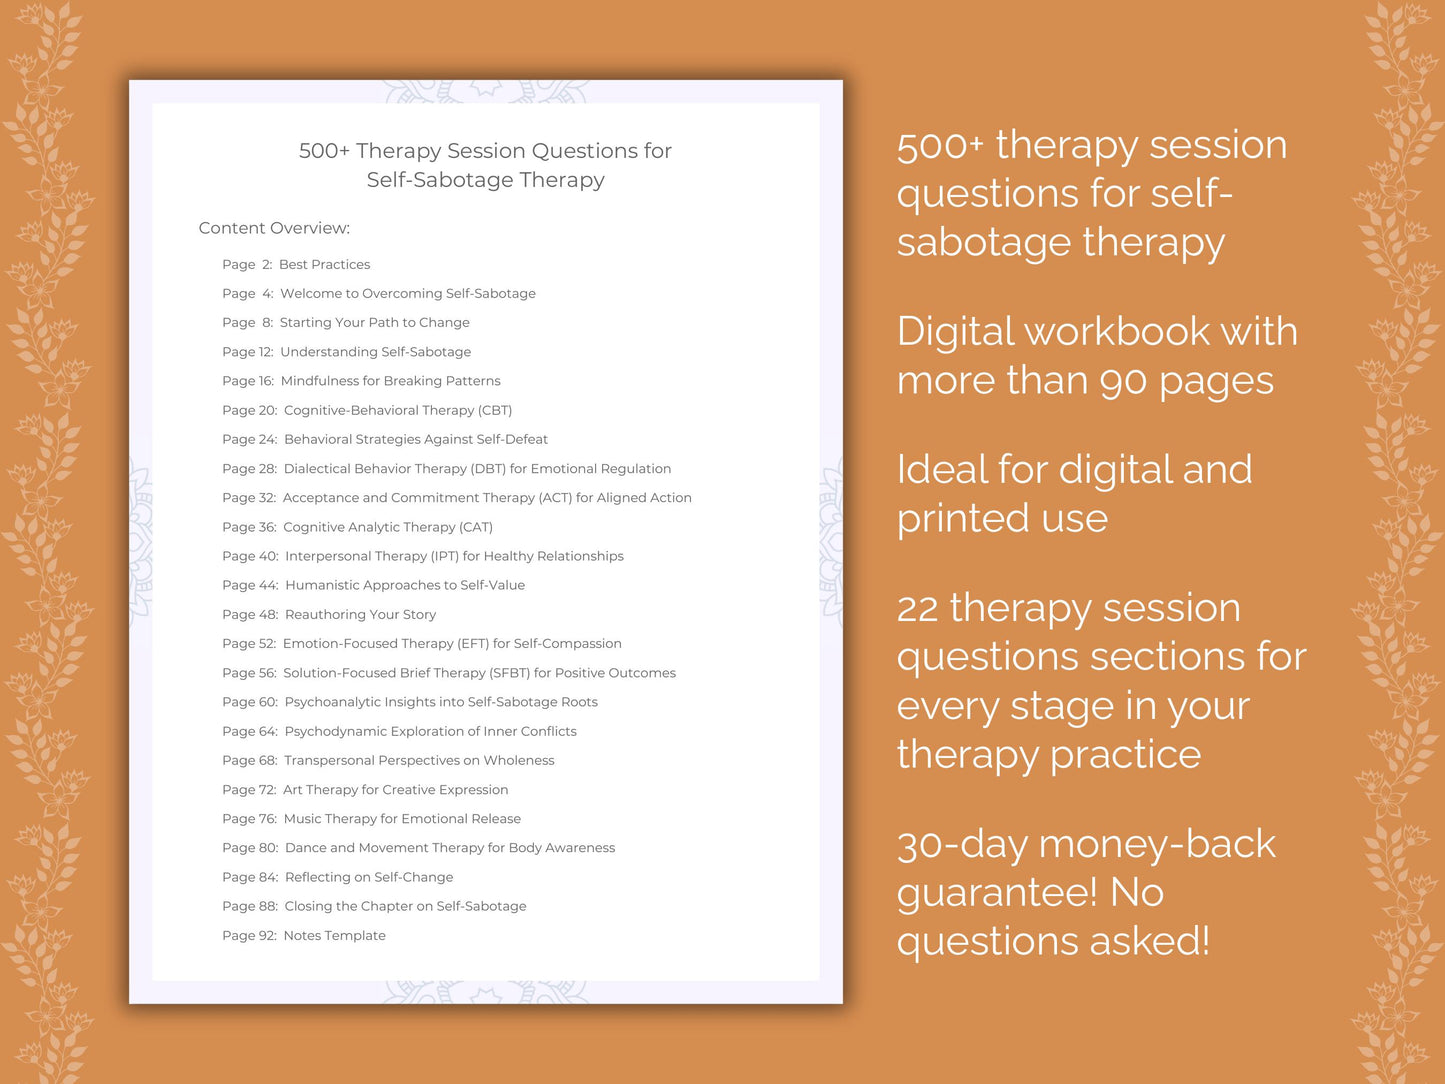 Self-Sabotage Therapy Session Questions Resource